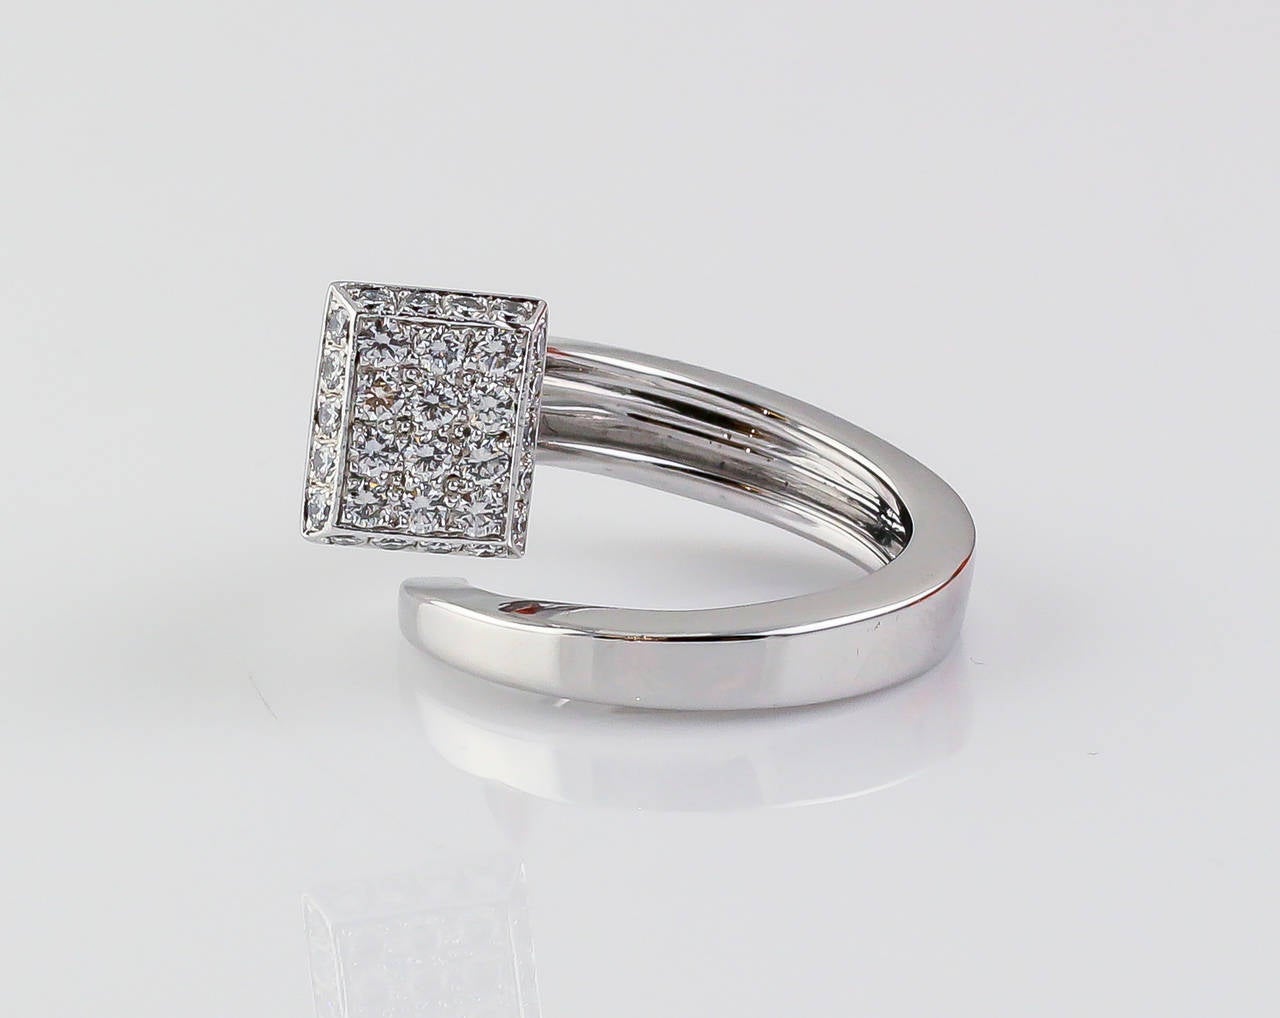 Unusual diamond and 18K white gold ring by Hermes. It is shaped as a twisted nail, with very high grade round brilliant cut diamonds on the top. Size 8 (can be sized up or down)

Hallmarks: Hermes, 750, reference numbers, French 18K gold assay